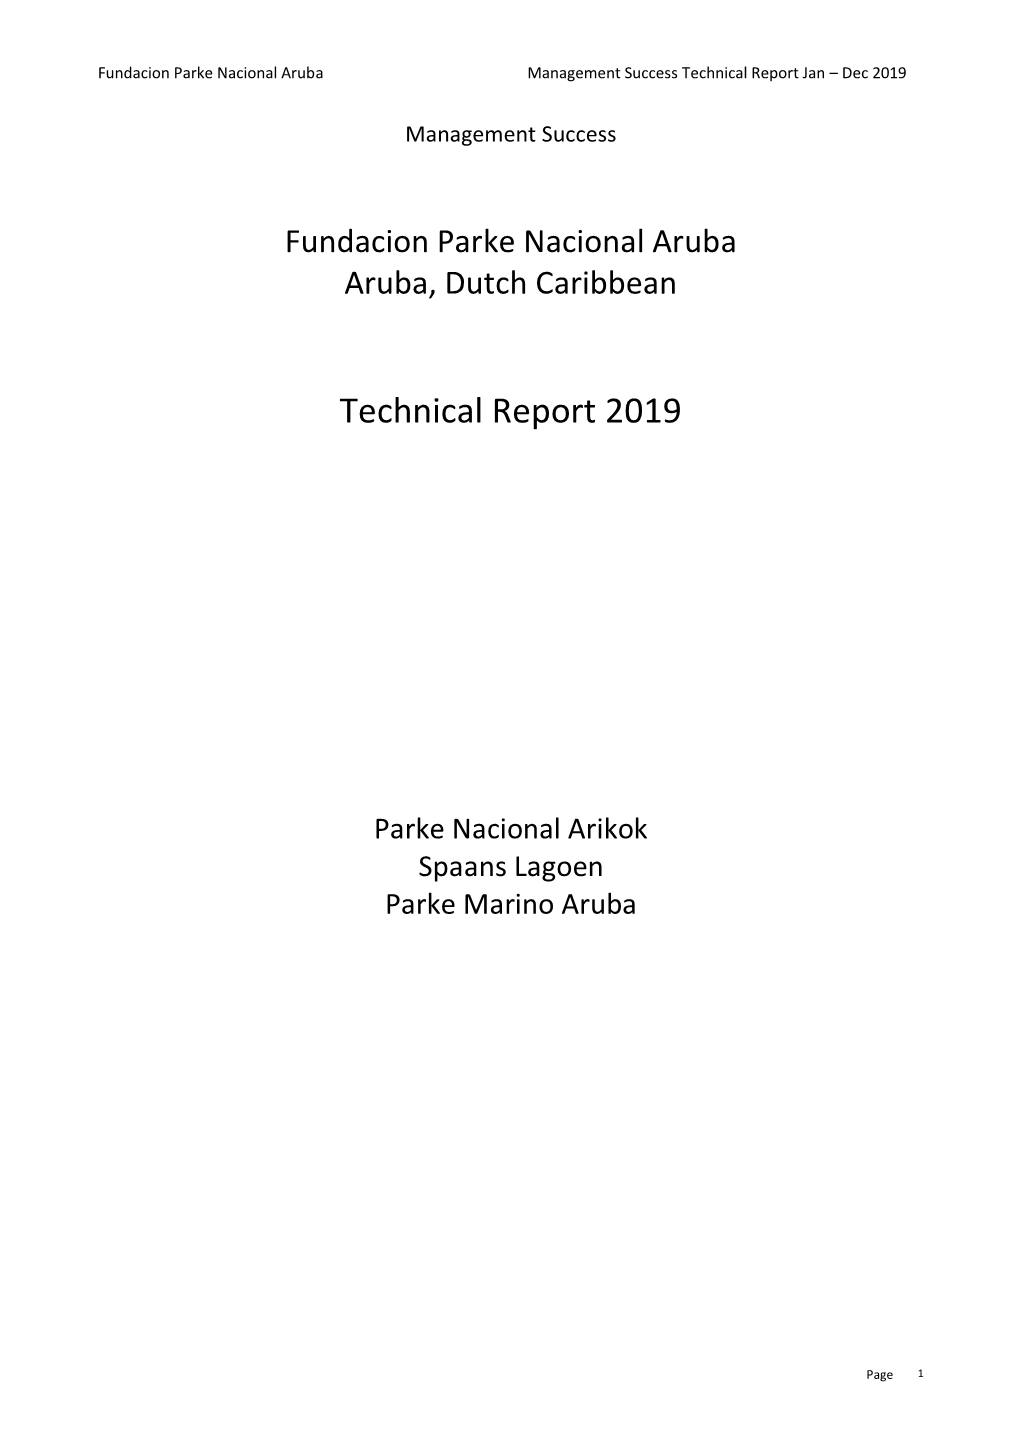 Technical Report 2019